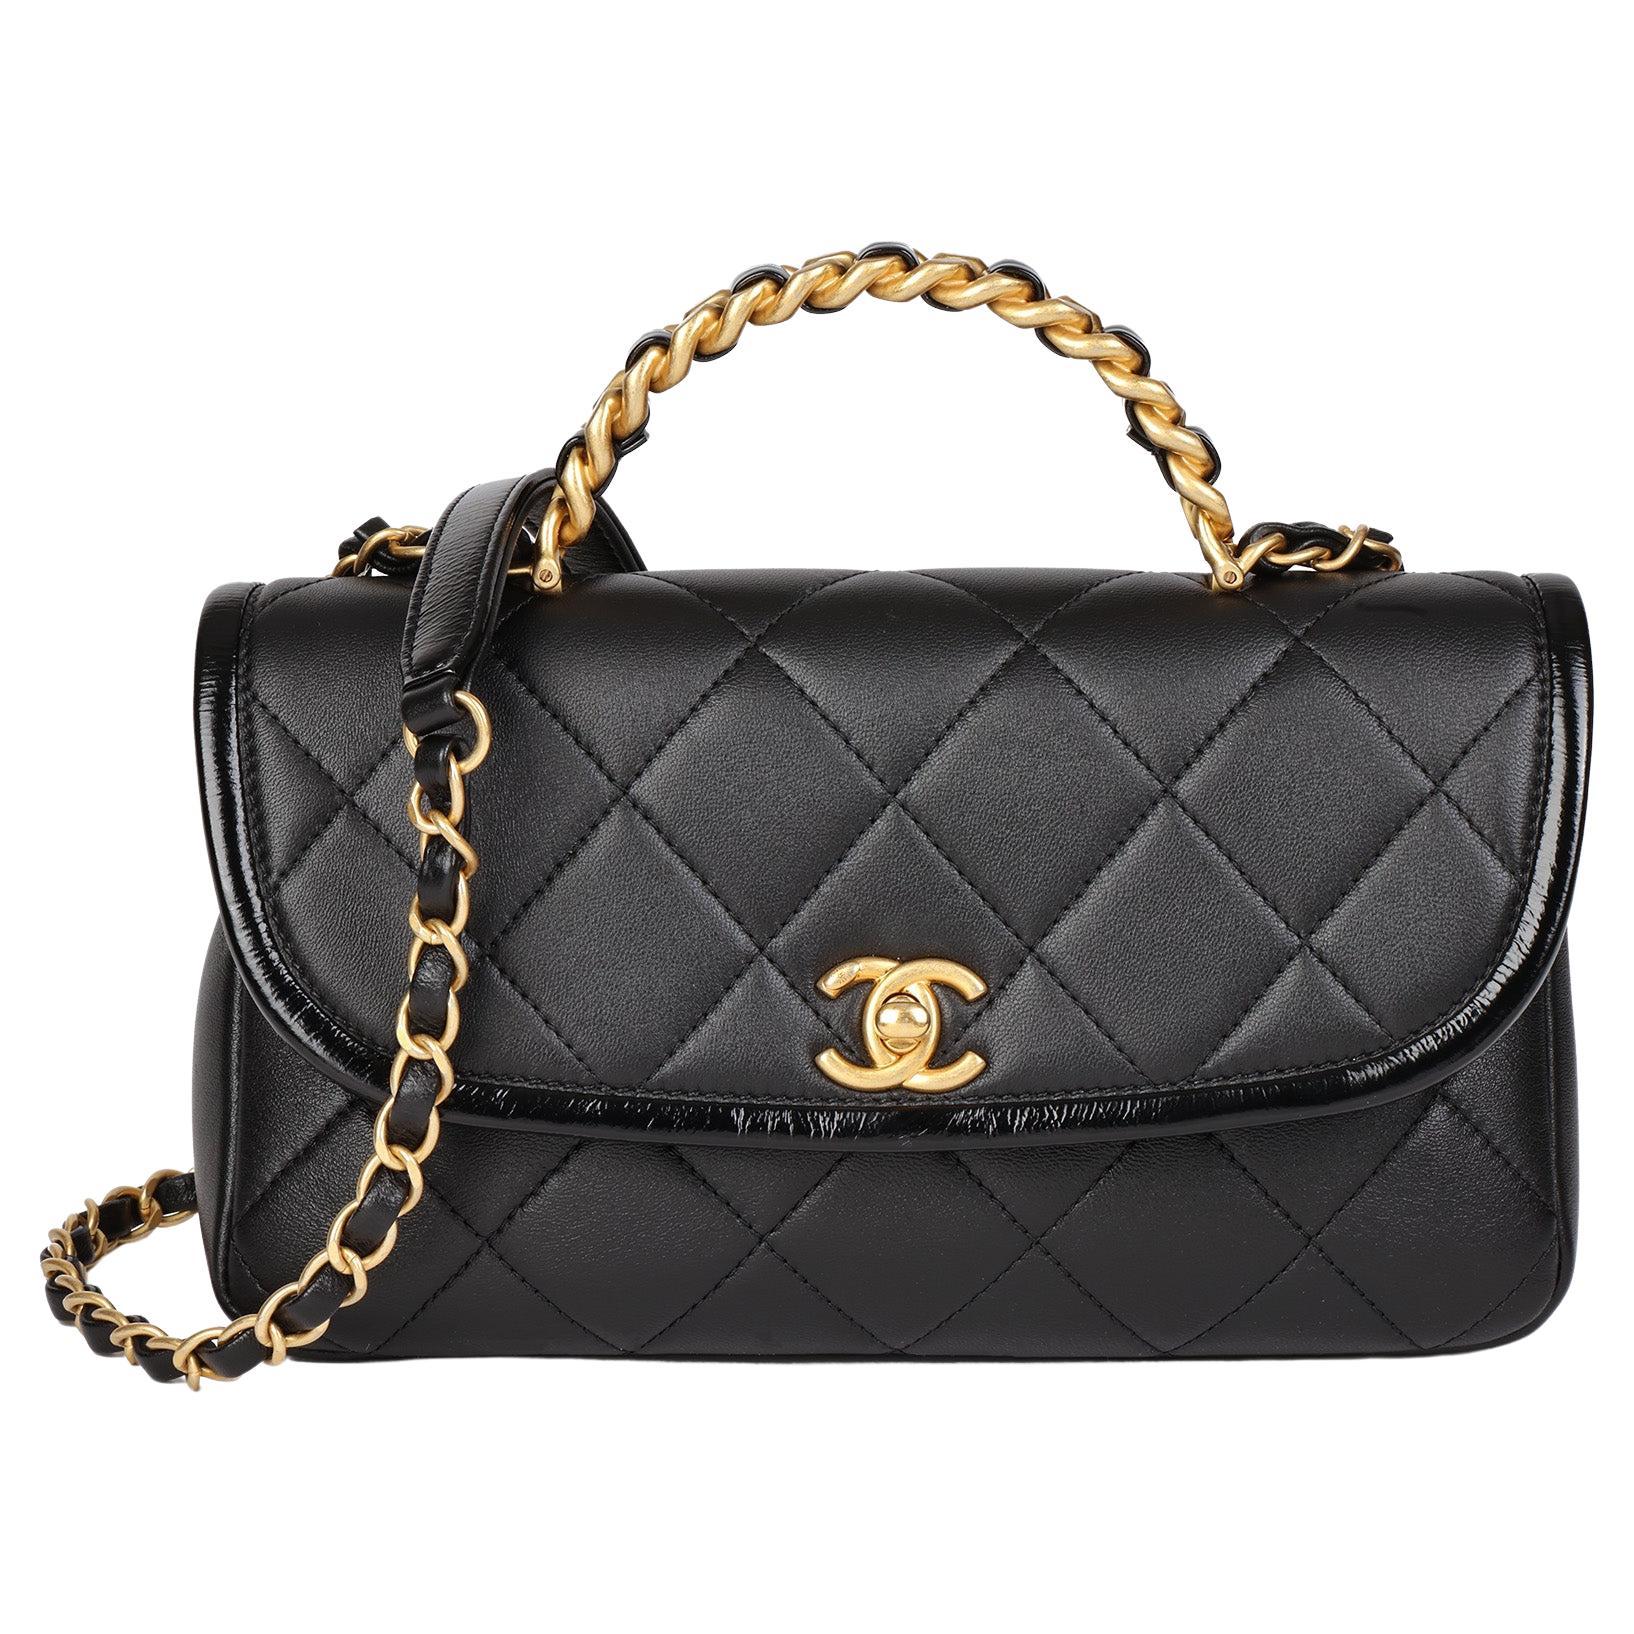 CHANEL Black Quilted Lambskin Small Classic Top Handle Flap Bag at